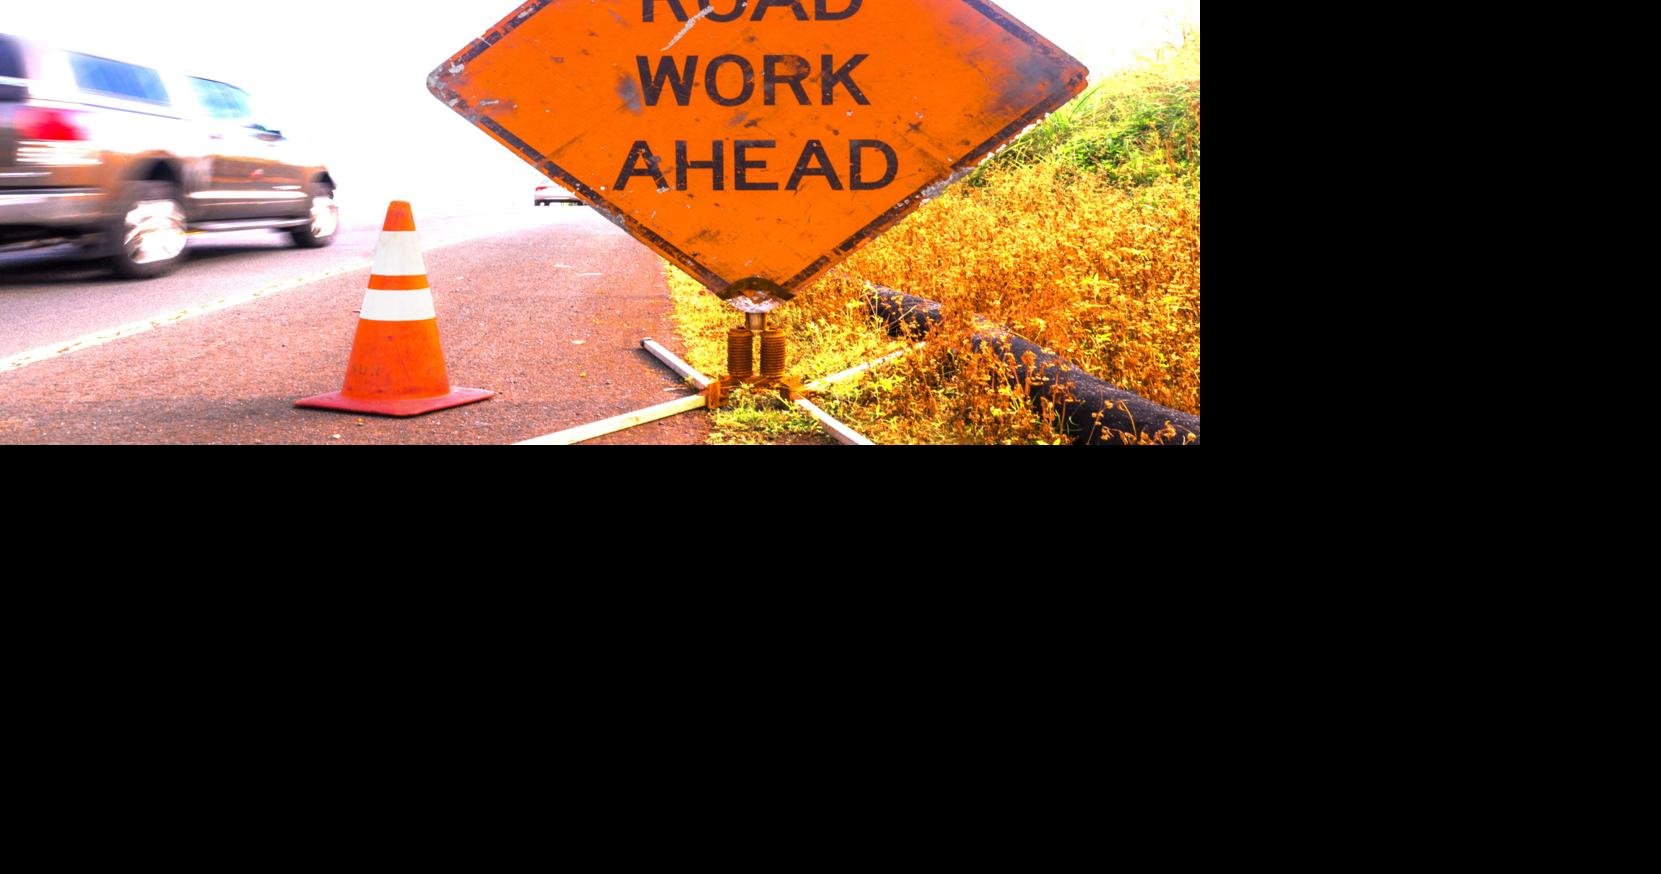 Bend: Cooley Road closing for 10 days beginning Thursday | Local&State ...